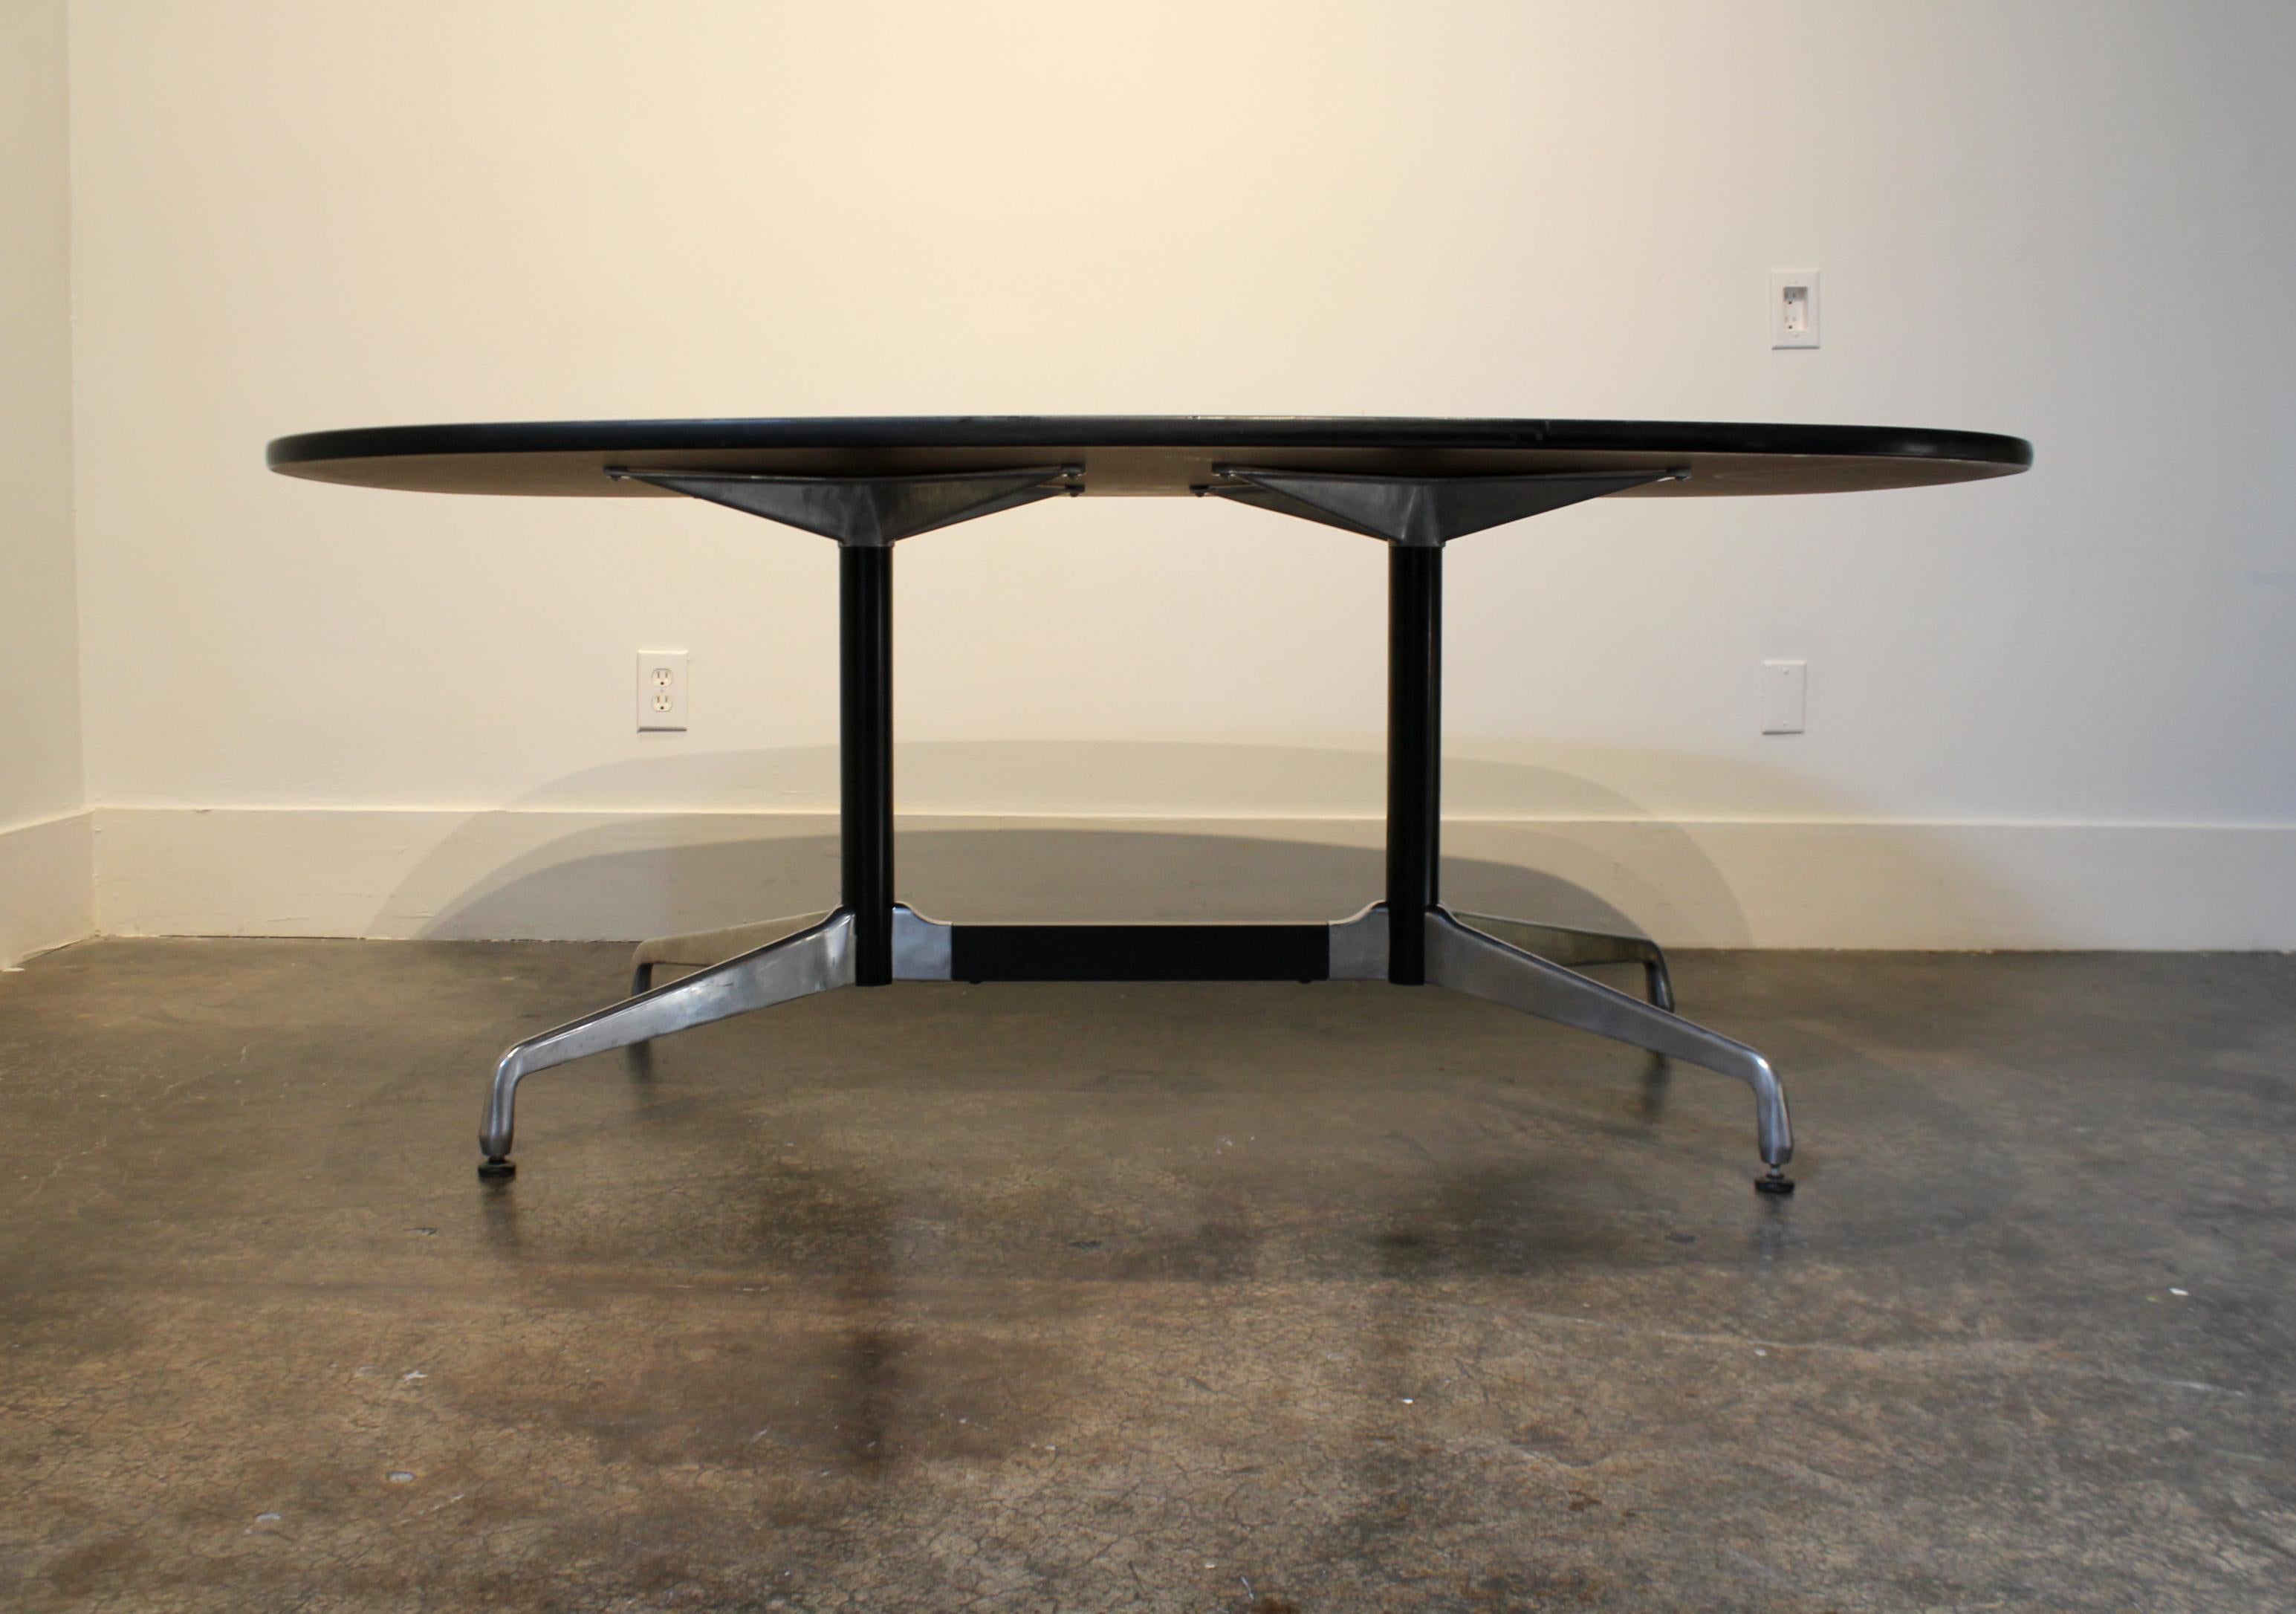 Herman Miller laminates top conference or dining table with a segmented aluminum base designed by Ray and Charles Eames. Classic, minimal midcentury design.

Small scratches to top and legs with a few deeper scratches to top (see pictures).